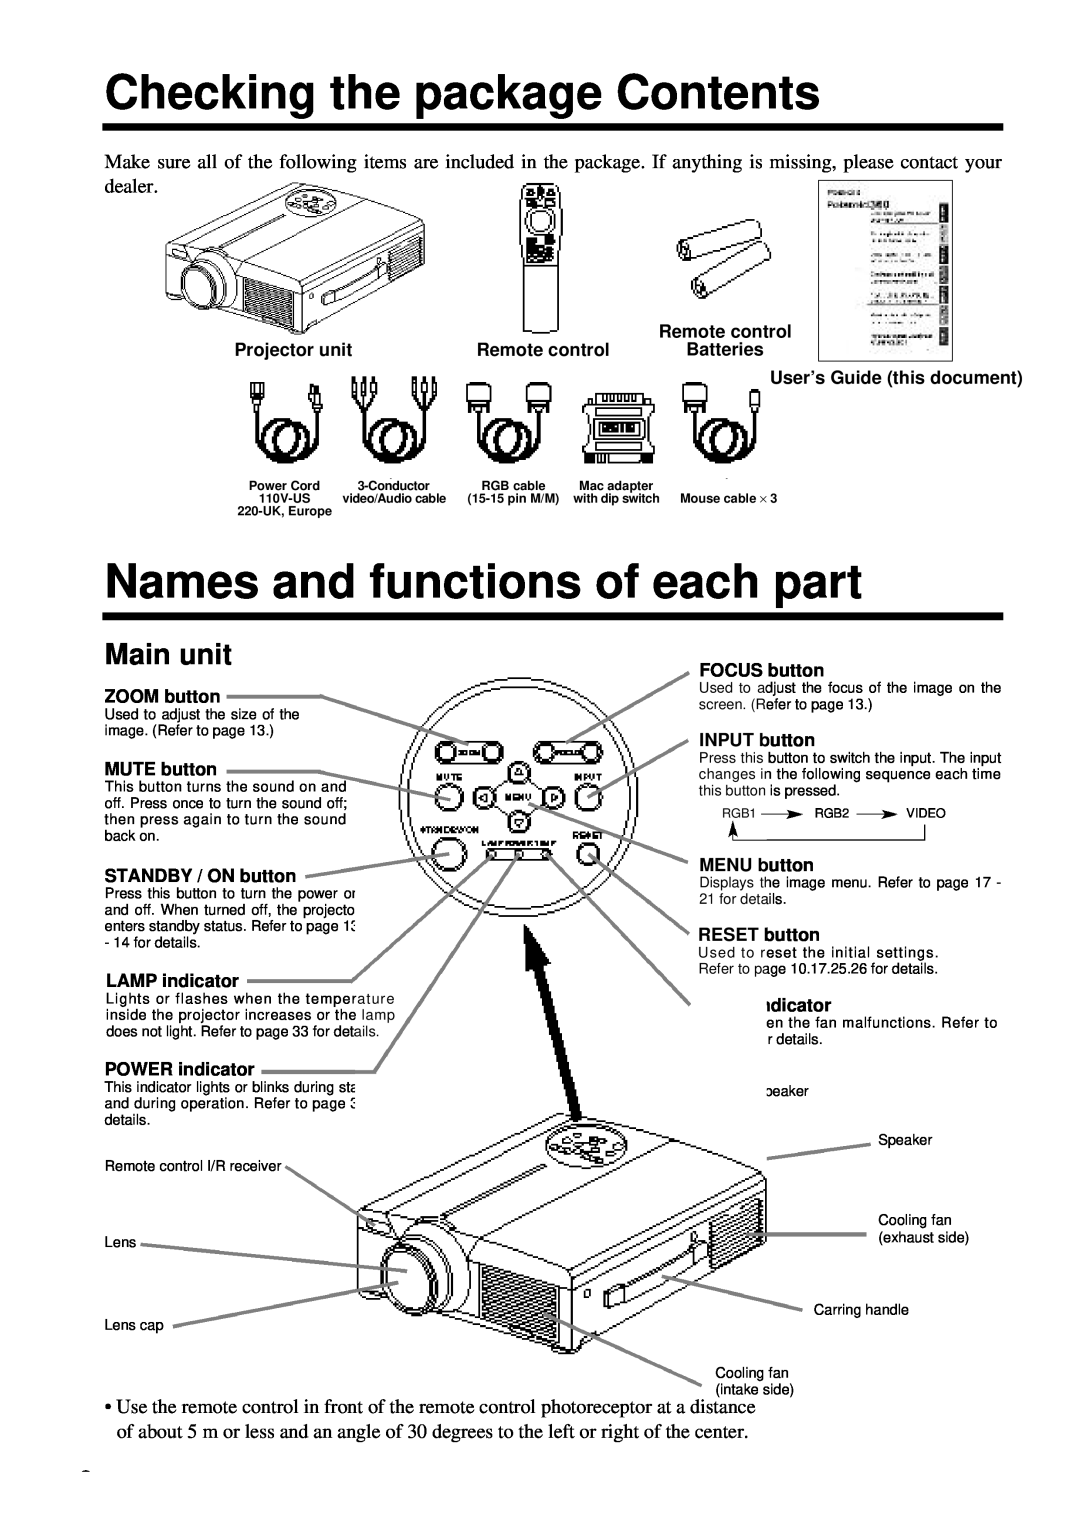 Polaroid PV 360 specifications Checking the package Contents, Names and functions of each part, Main unit 